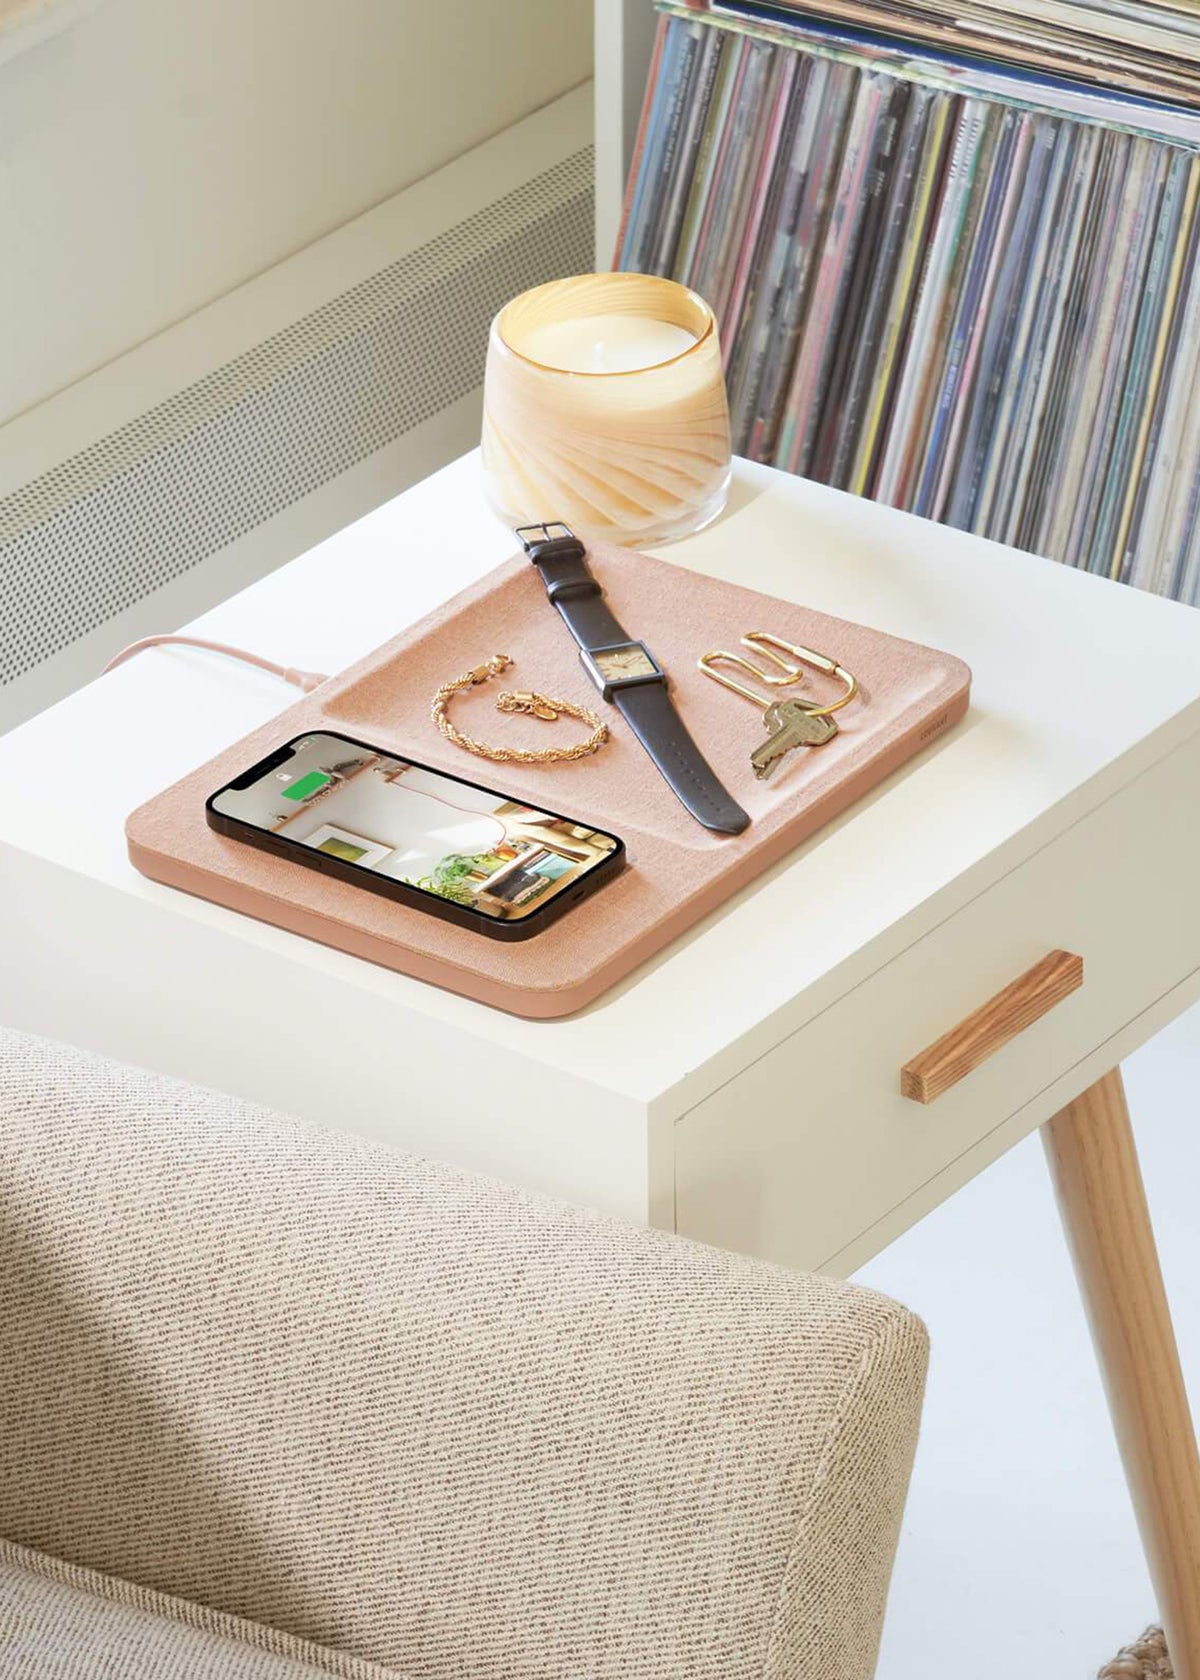 Charger on white side table